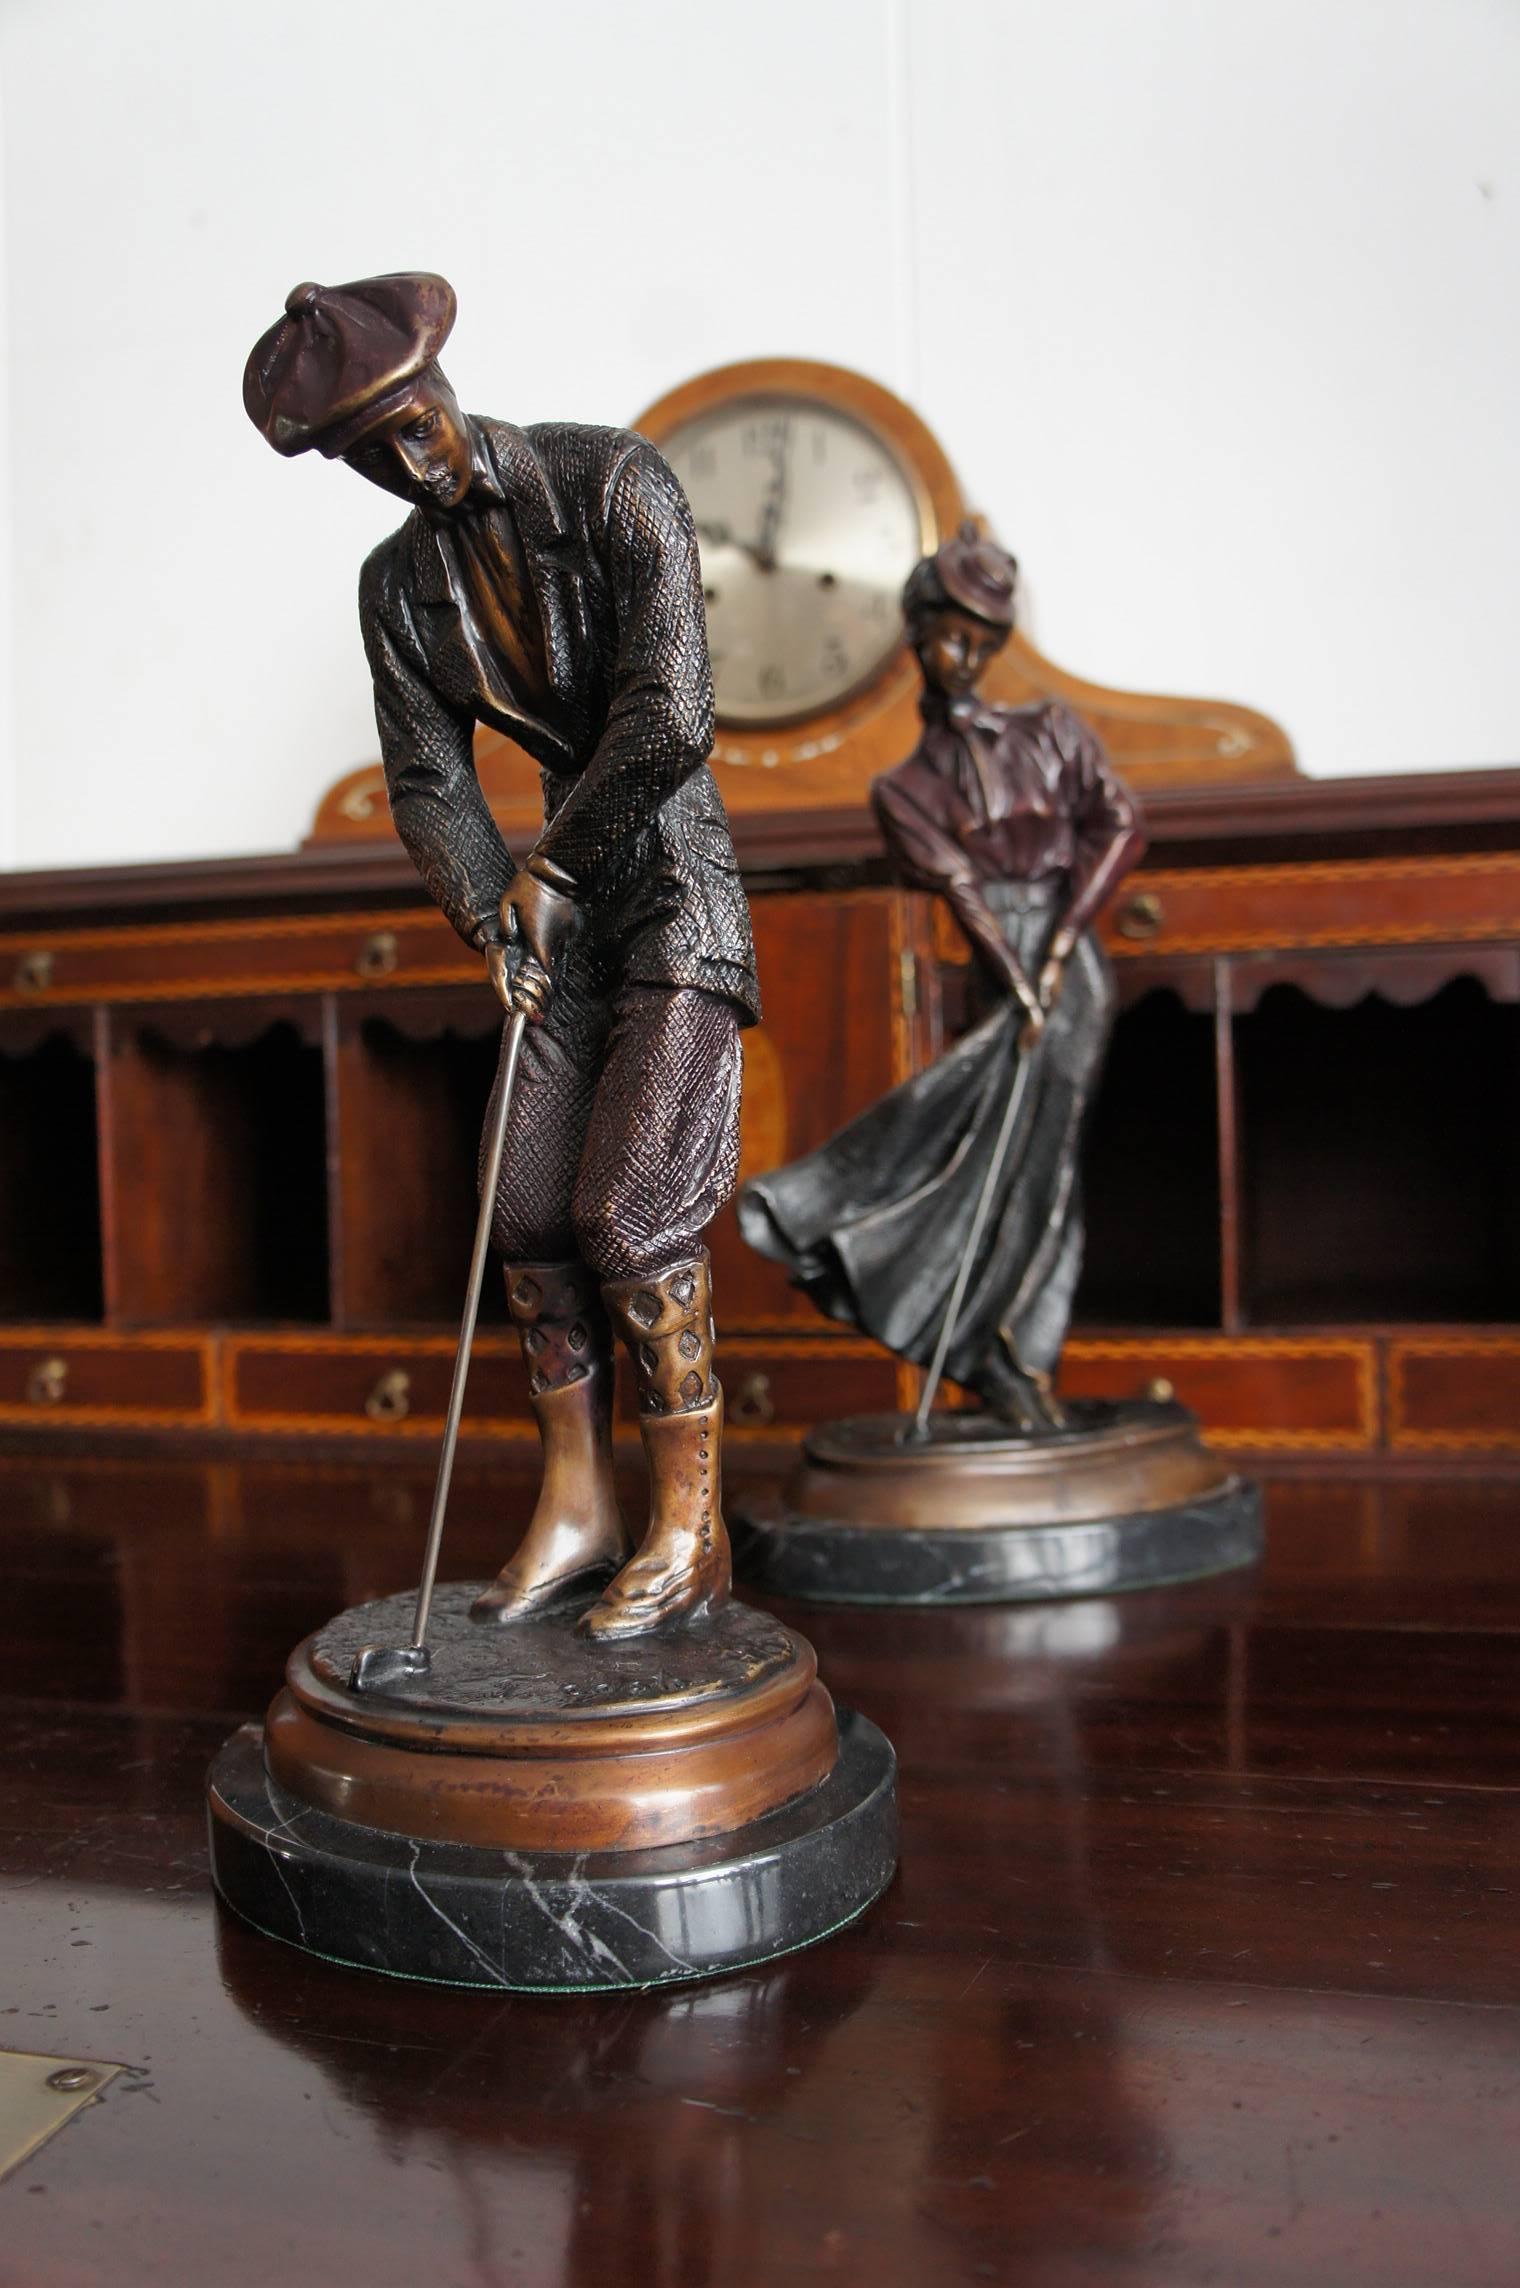 Lovely pair of bronze golfplayers on a marble base.

This vintage pair of patinated bronze golf players is in excellent condition. They seem to be preparing for their round on the practice green. Their vintage 1920's outfit makes them extra stylish